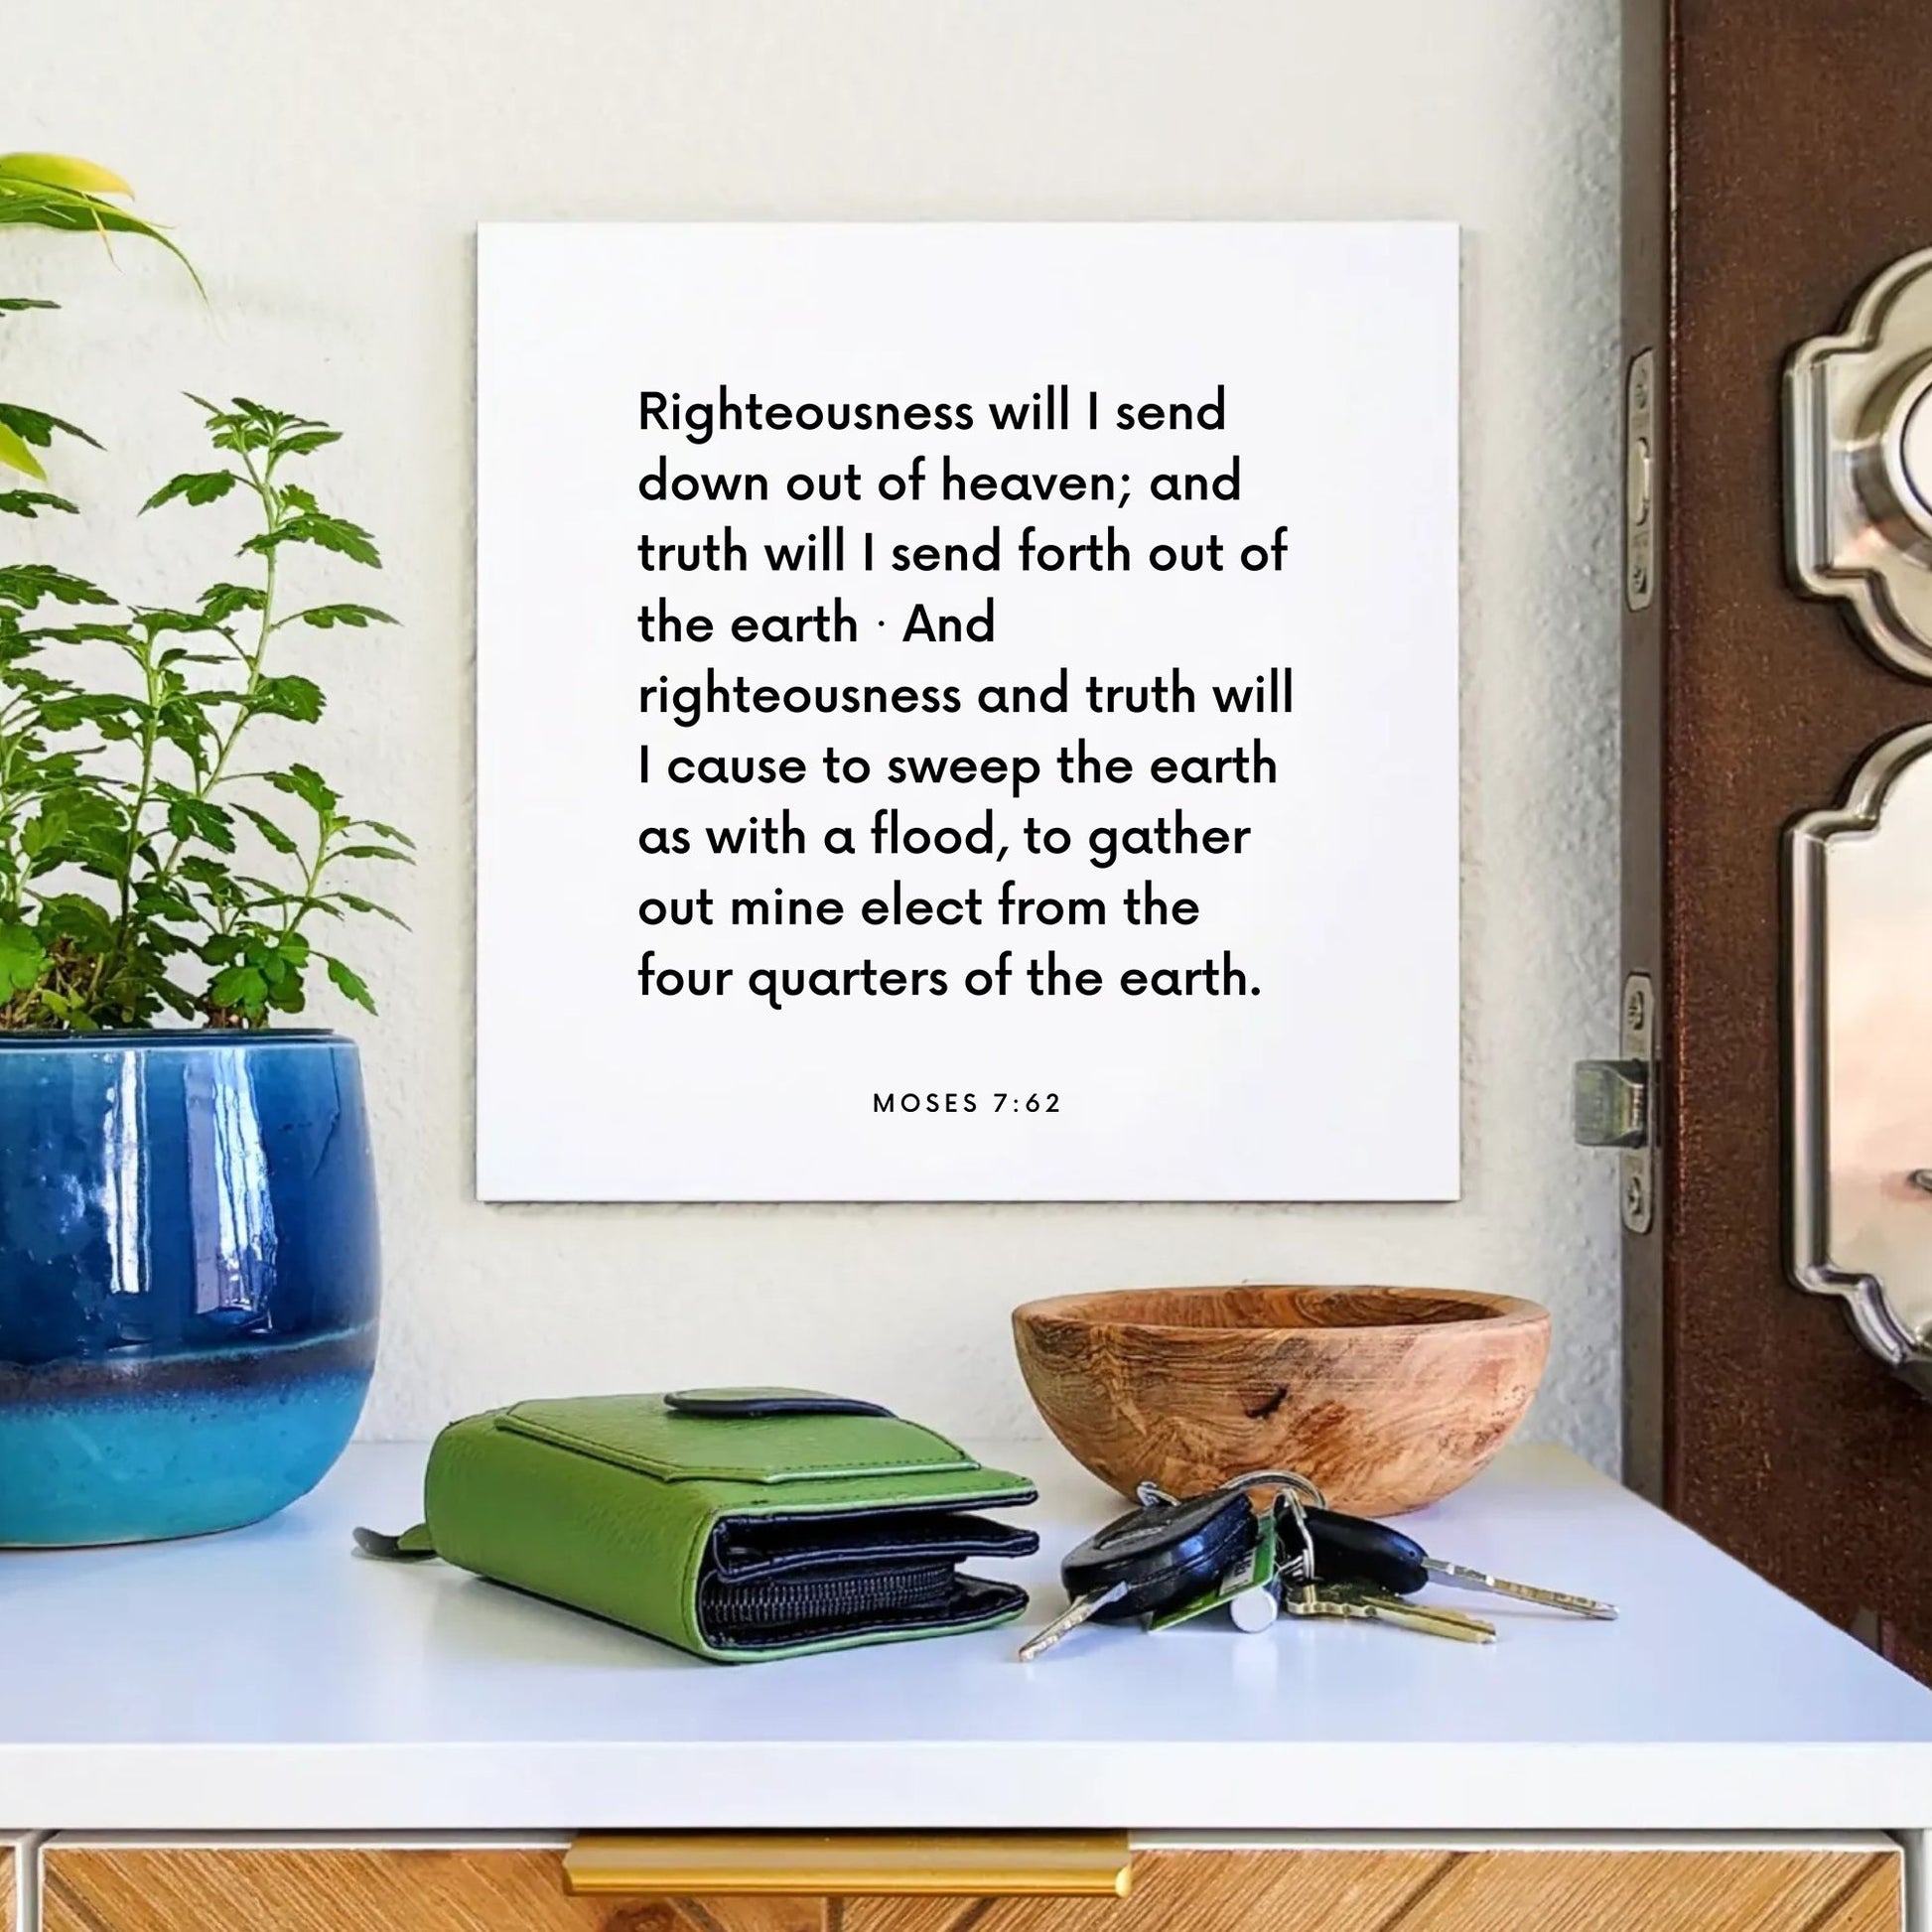 Entryway mouting of the scripture tile for Moses 7:62 - "Righteousness will I send down out of heaven"